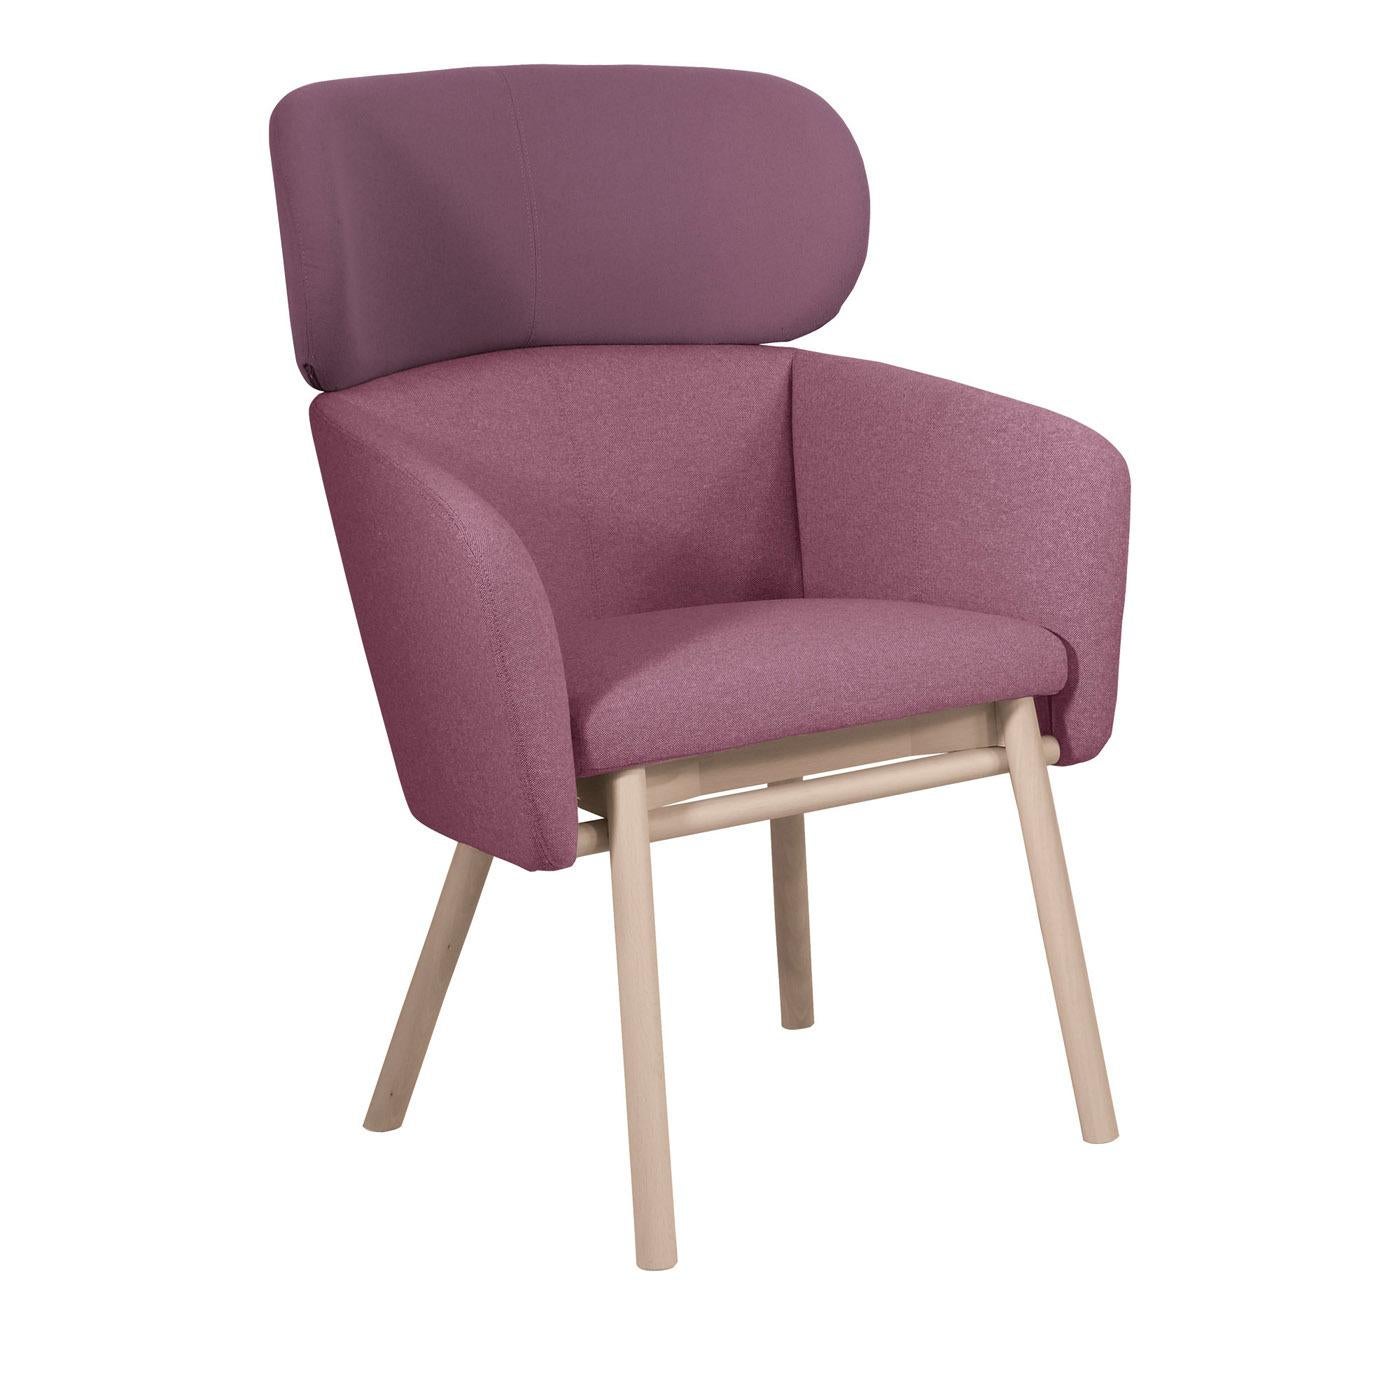 This stunning chair will be a delicate and cozy accent in a modern living or dining room. The solid, sleek structure is made of bleached beechwood and rests on four long, slanted legs. A more spacious version of the Balù chair designed by Emilio